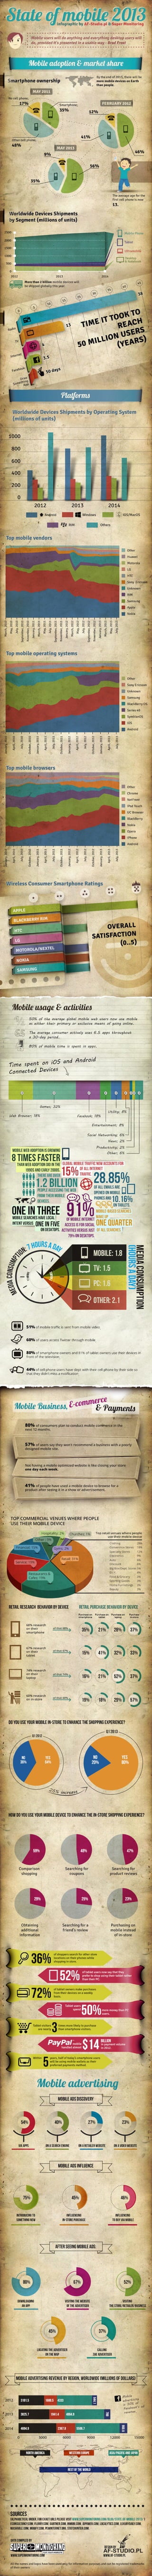 Infographic 2013 Mobile Life